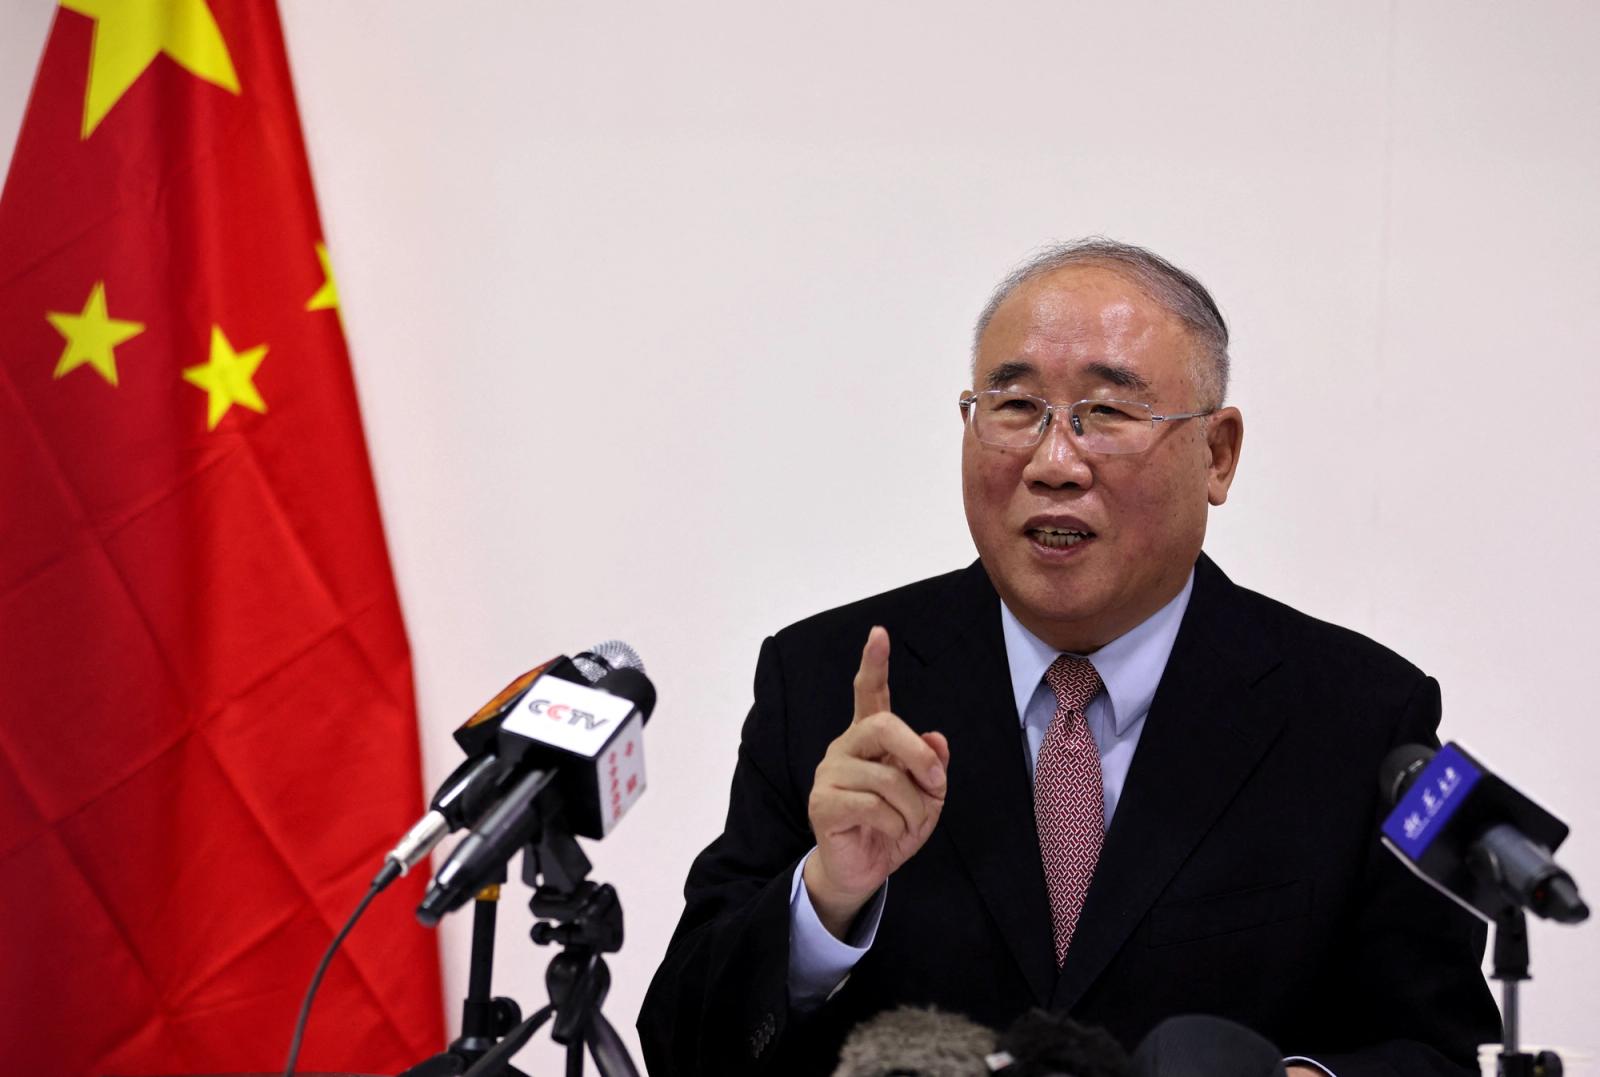 China's chief climate negotiator Xie Zhenhua speaks during a news conference at the COP27 climate summit in Red Sea resort of Sharm el-Sheikh, Egypt